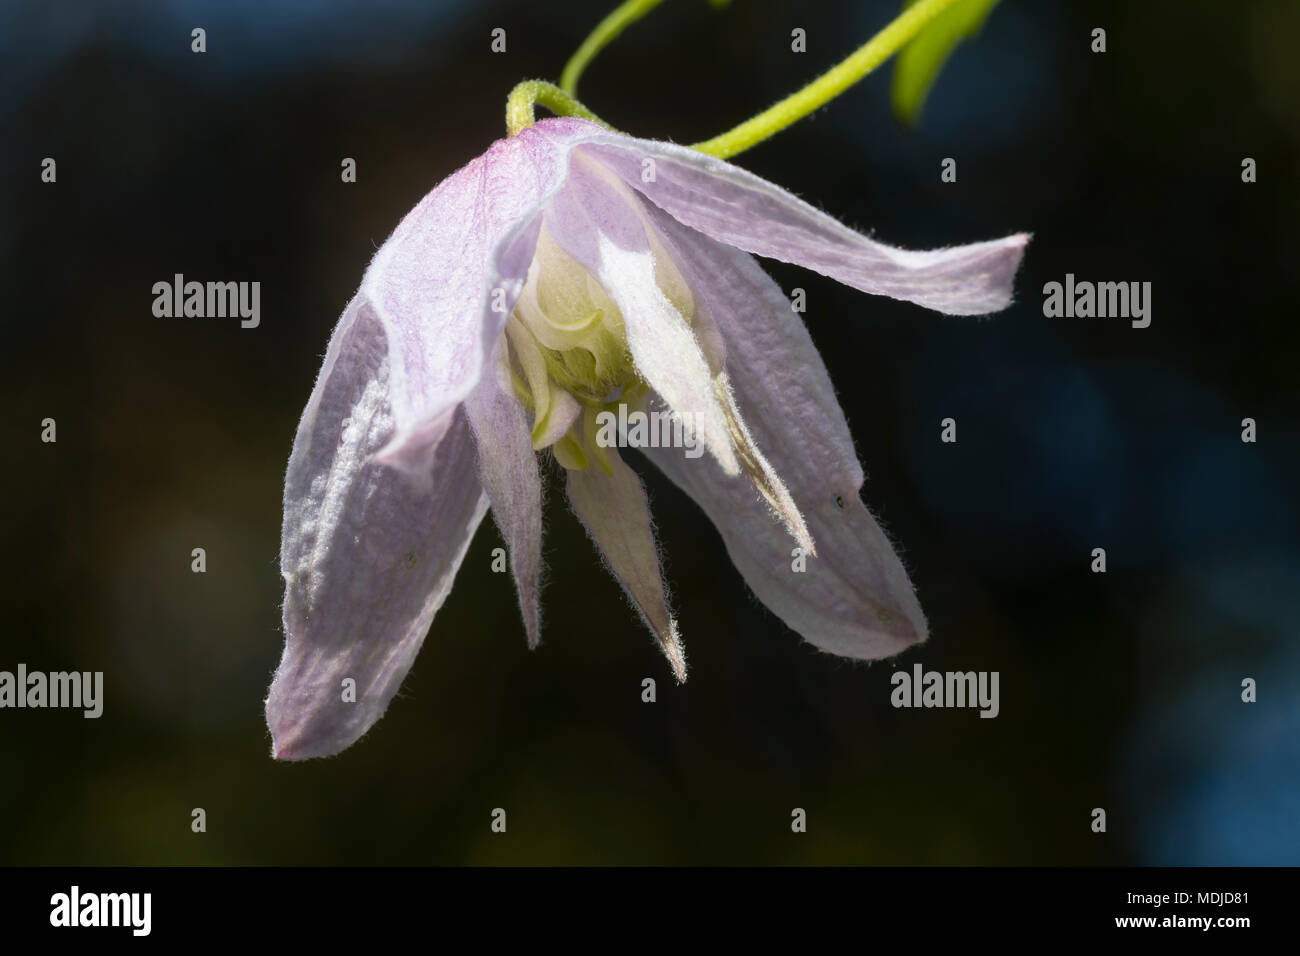 Single flower of the spring flowering woody climber, Clematis macropetala 'Hope' Stock Photo